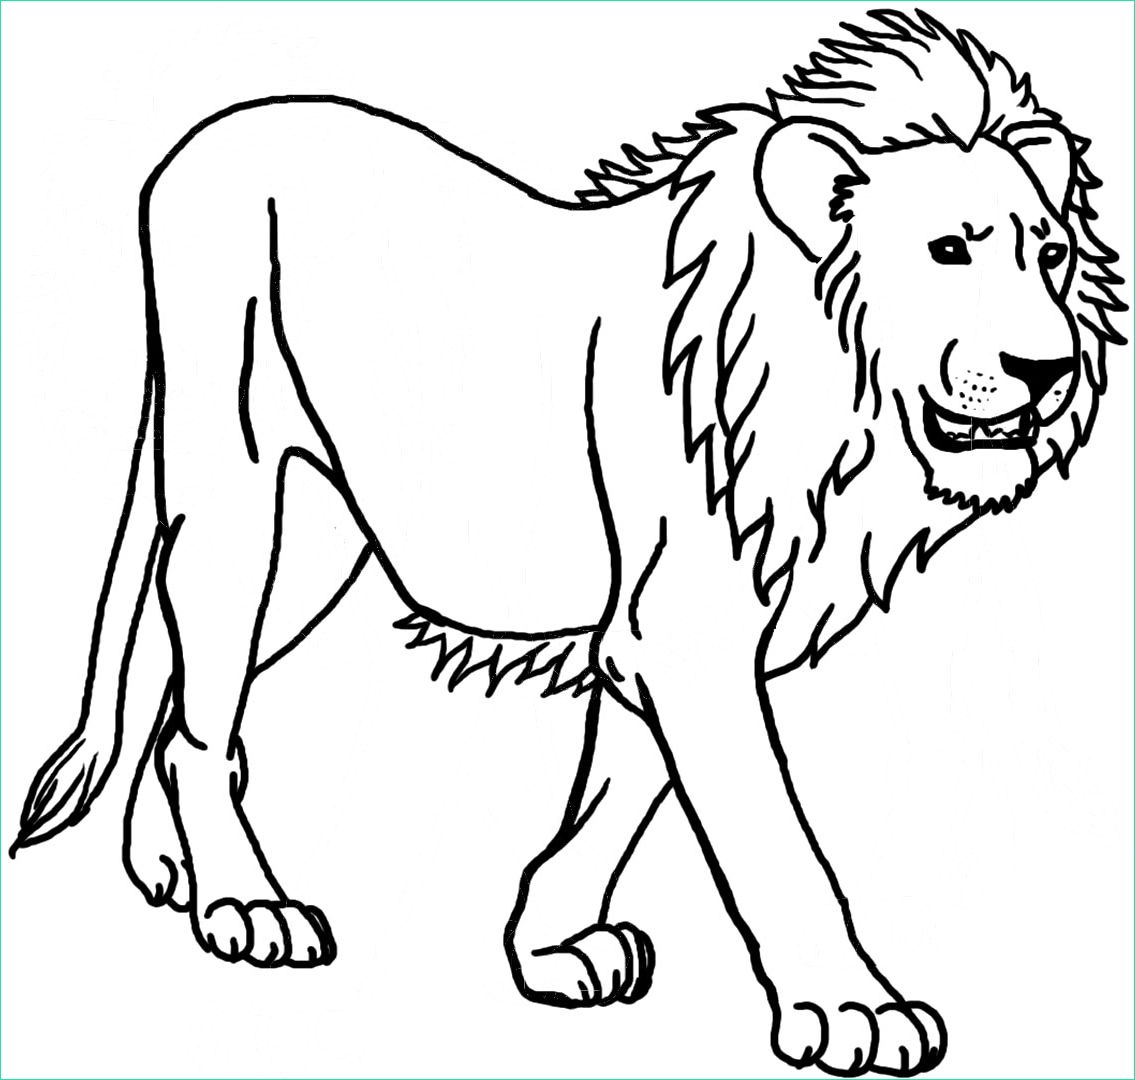 Coloriage Animaux Sauvage Cool Stock Coloriage Animaux Sauvages à Imprimer Sur Coloriages Fo